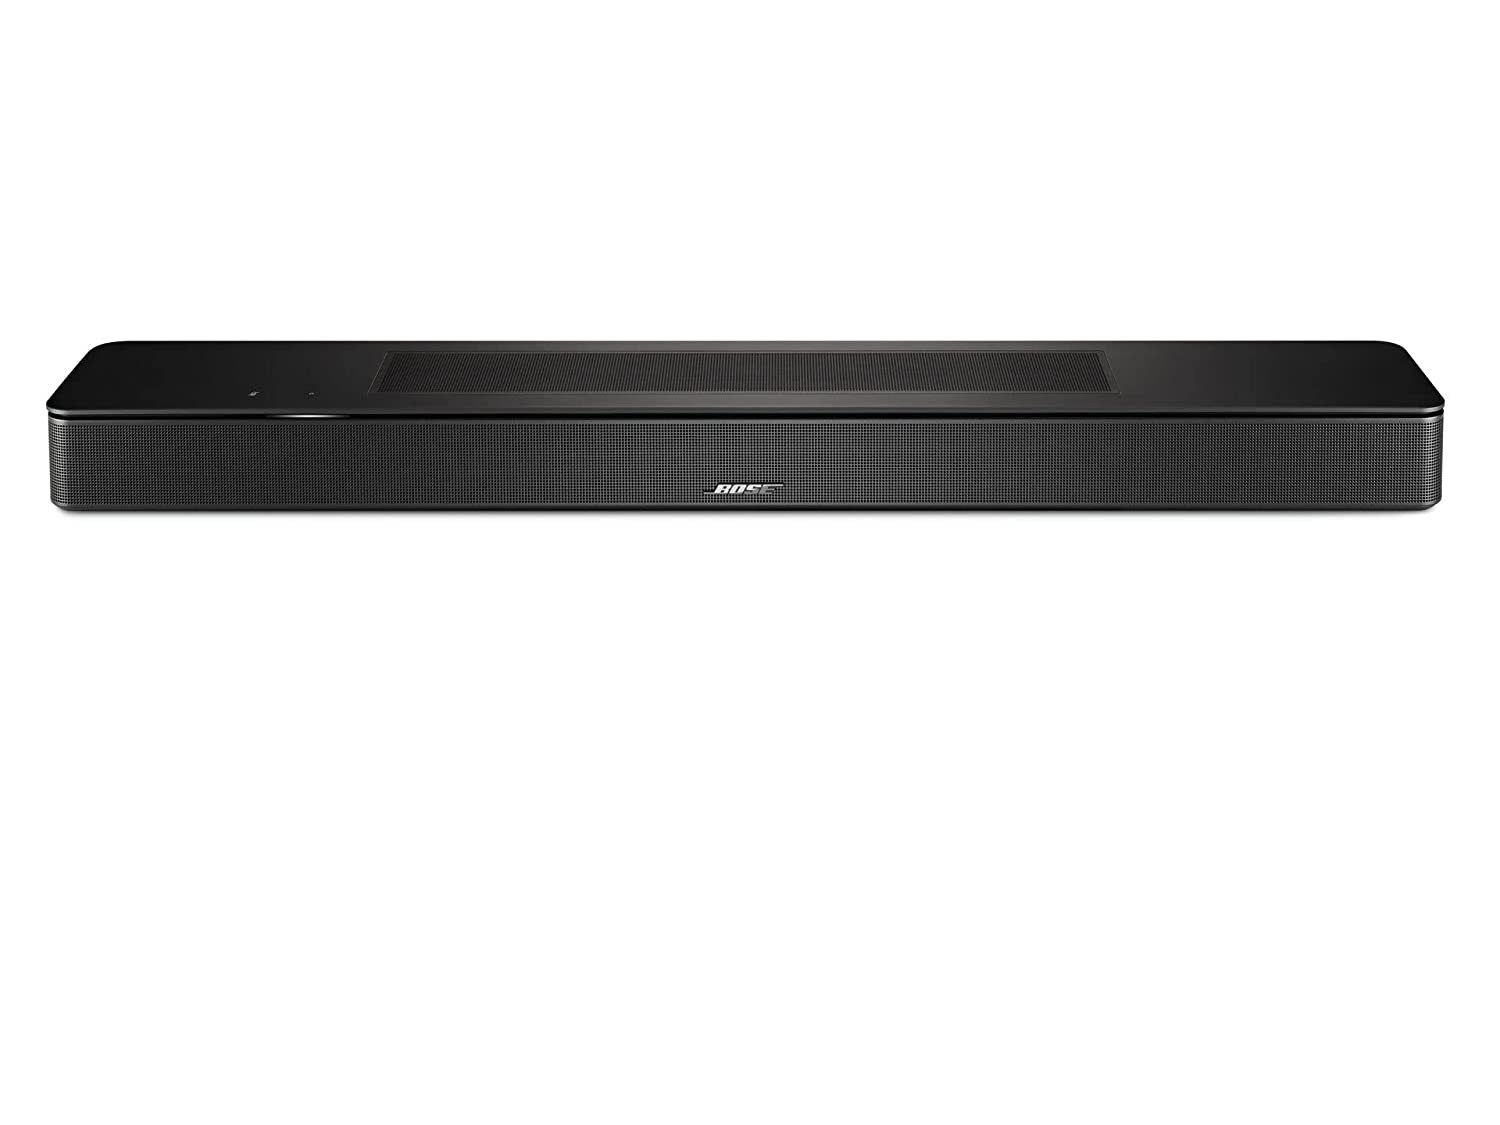 Bose New Smart Soundbar 600 Dolby Atmos with Alexa Built-in.